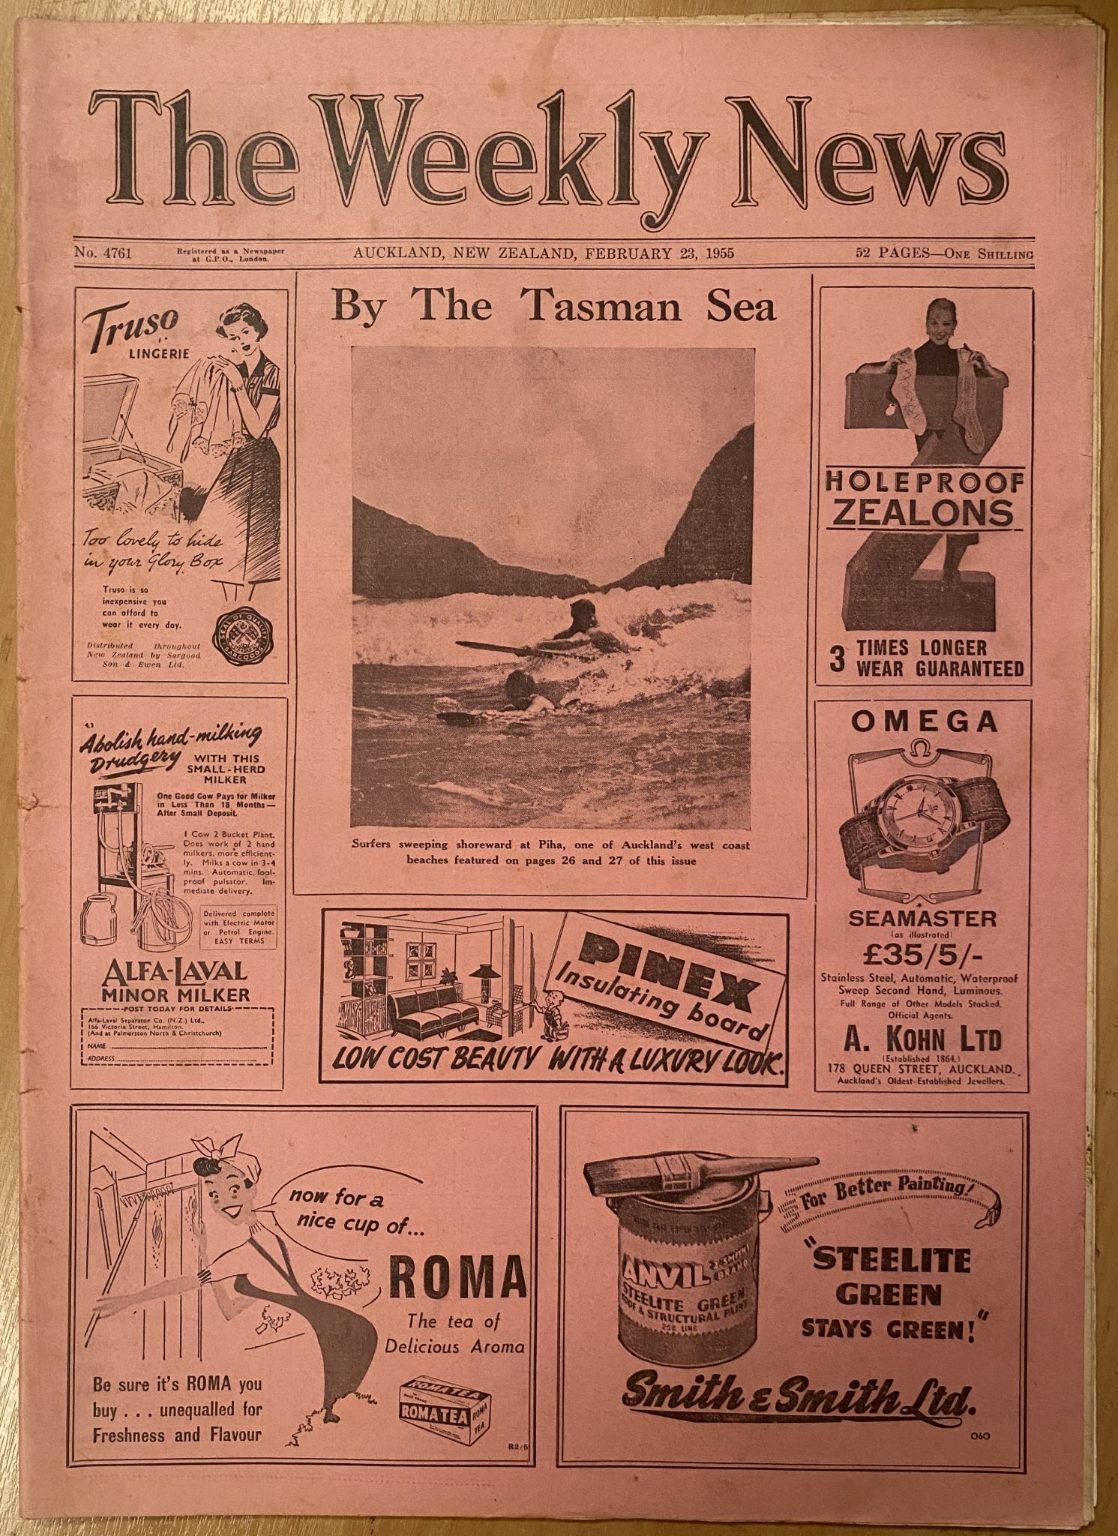 OLD NEWSPAPER: The Weekly News - No. 4761, 23 February 1955